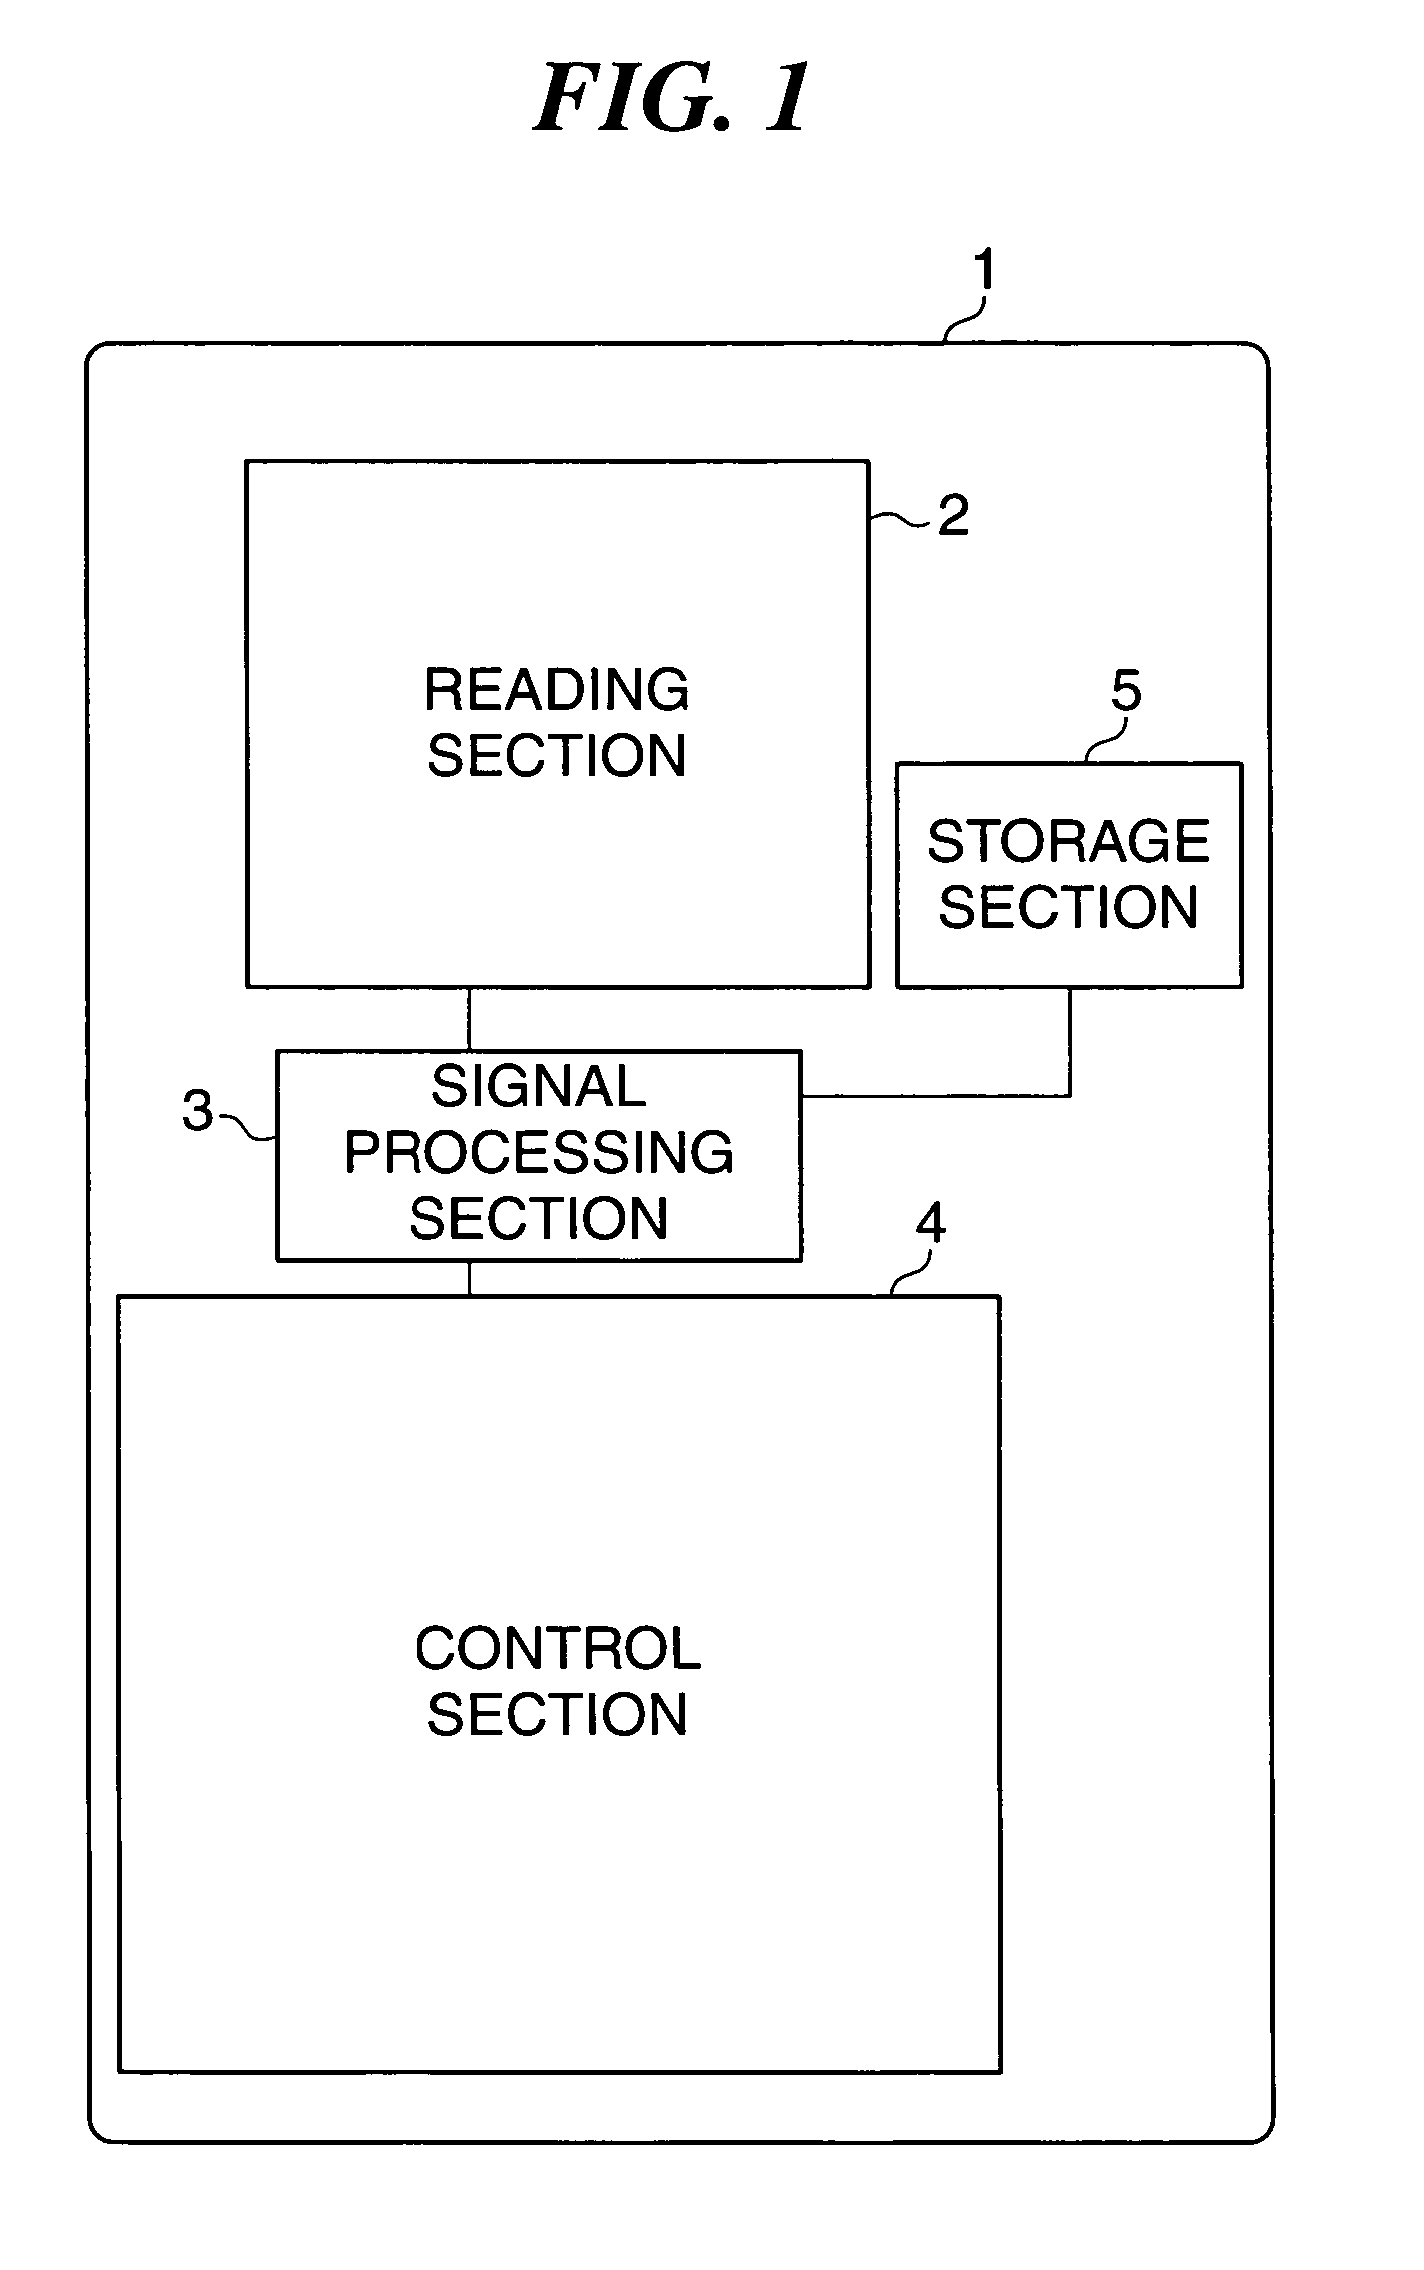 Image reading apparatus and method of controlling image reading apparatus